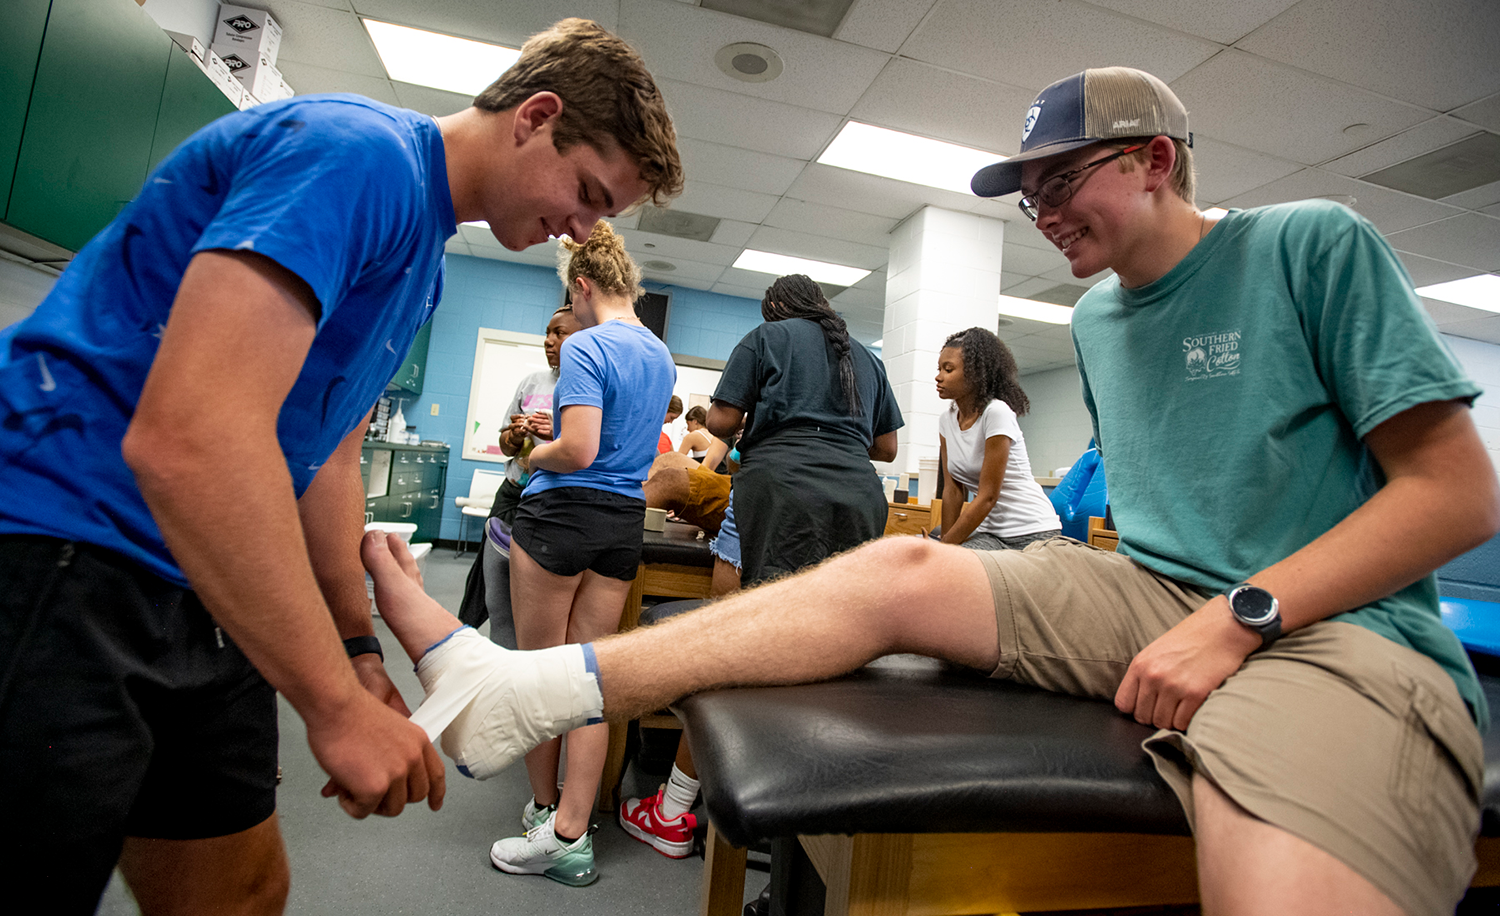 Students learn how to tape injuries in their Sports Medicine class.